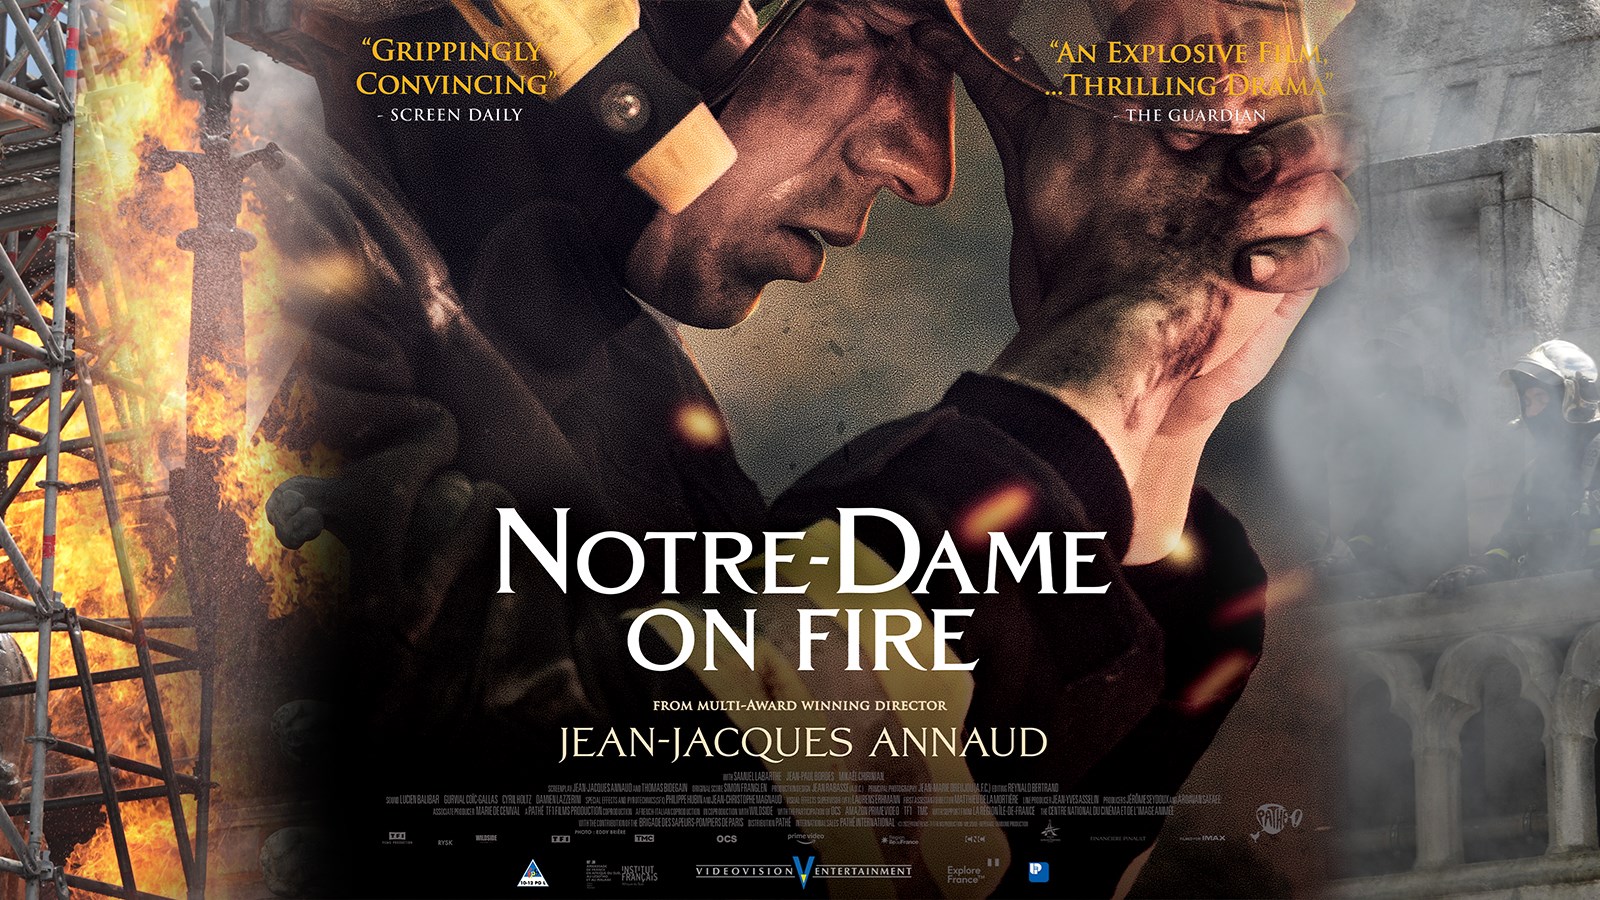 NOTRE-DAME ON FIRE